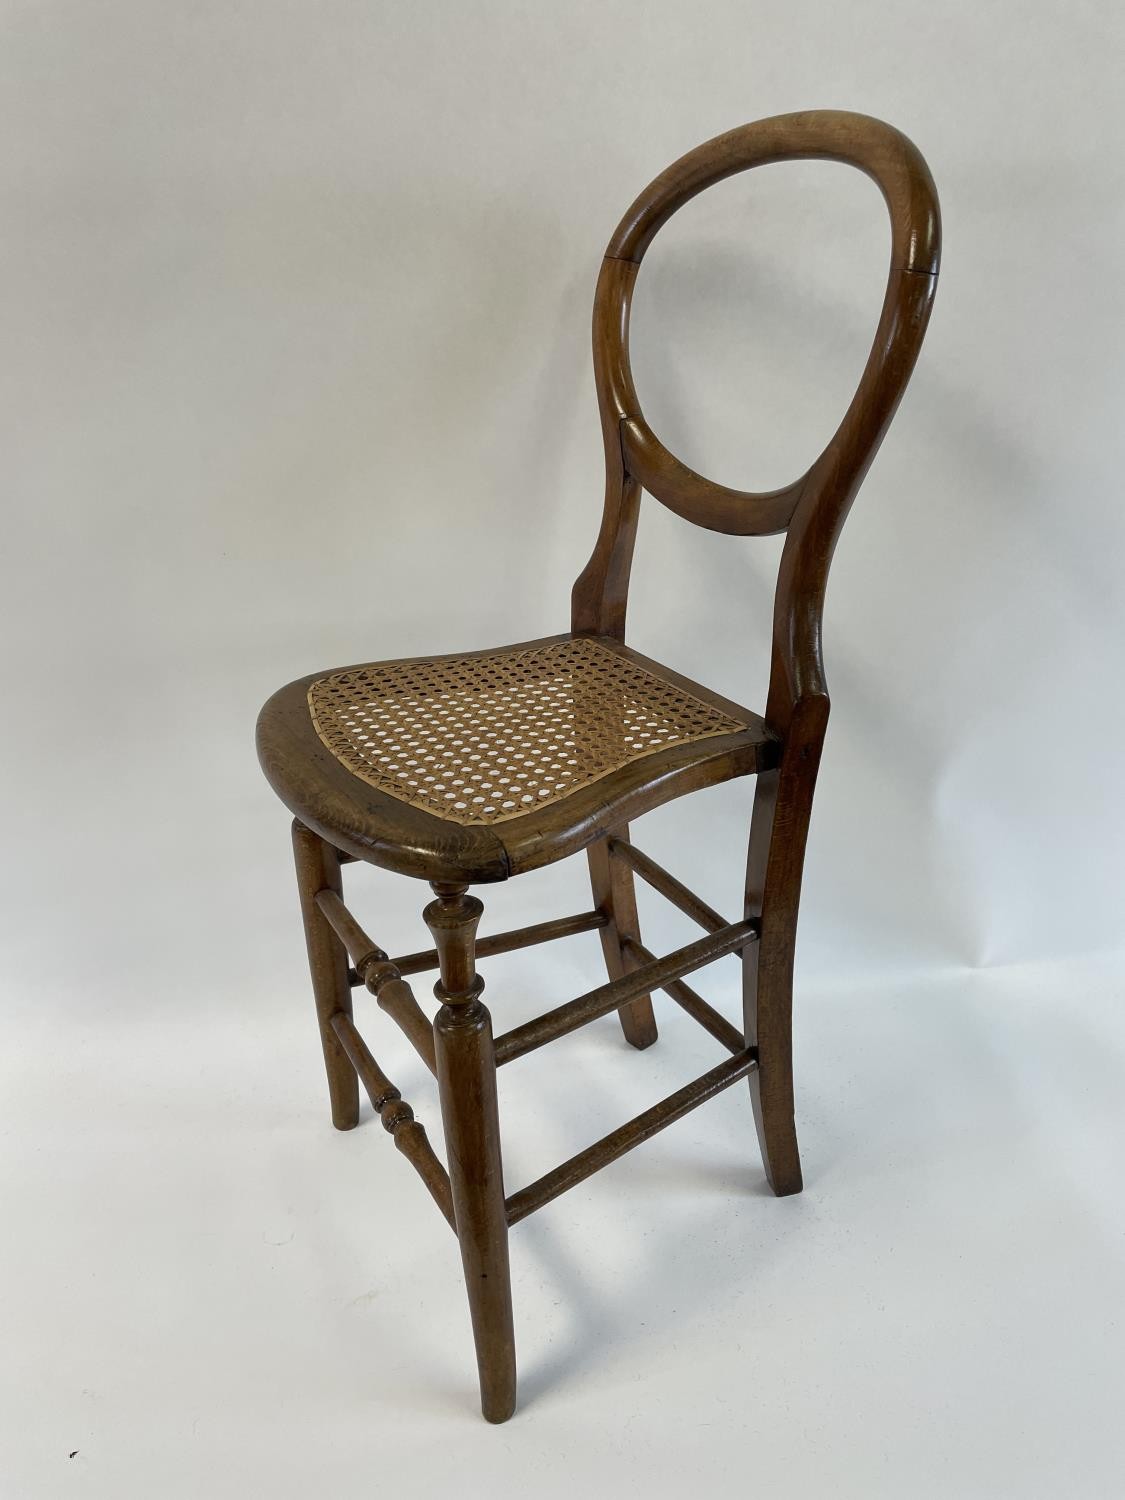 An early 20th century deportment chair